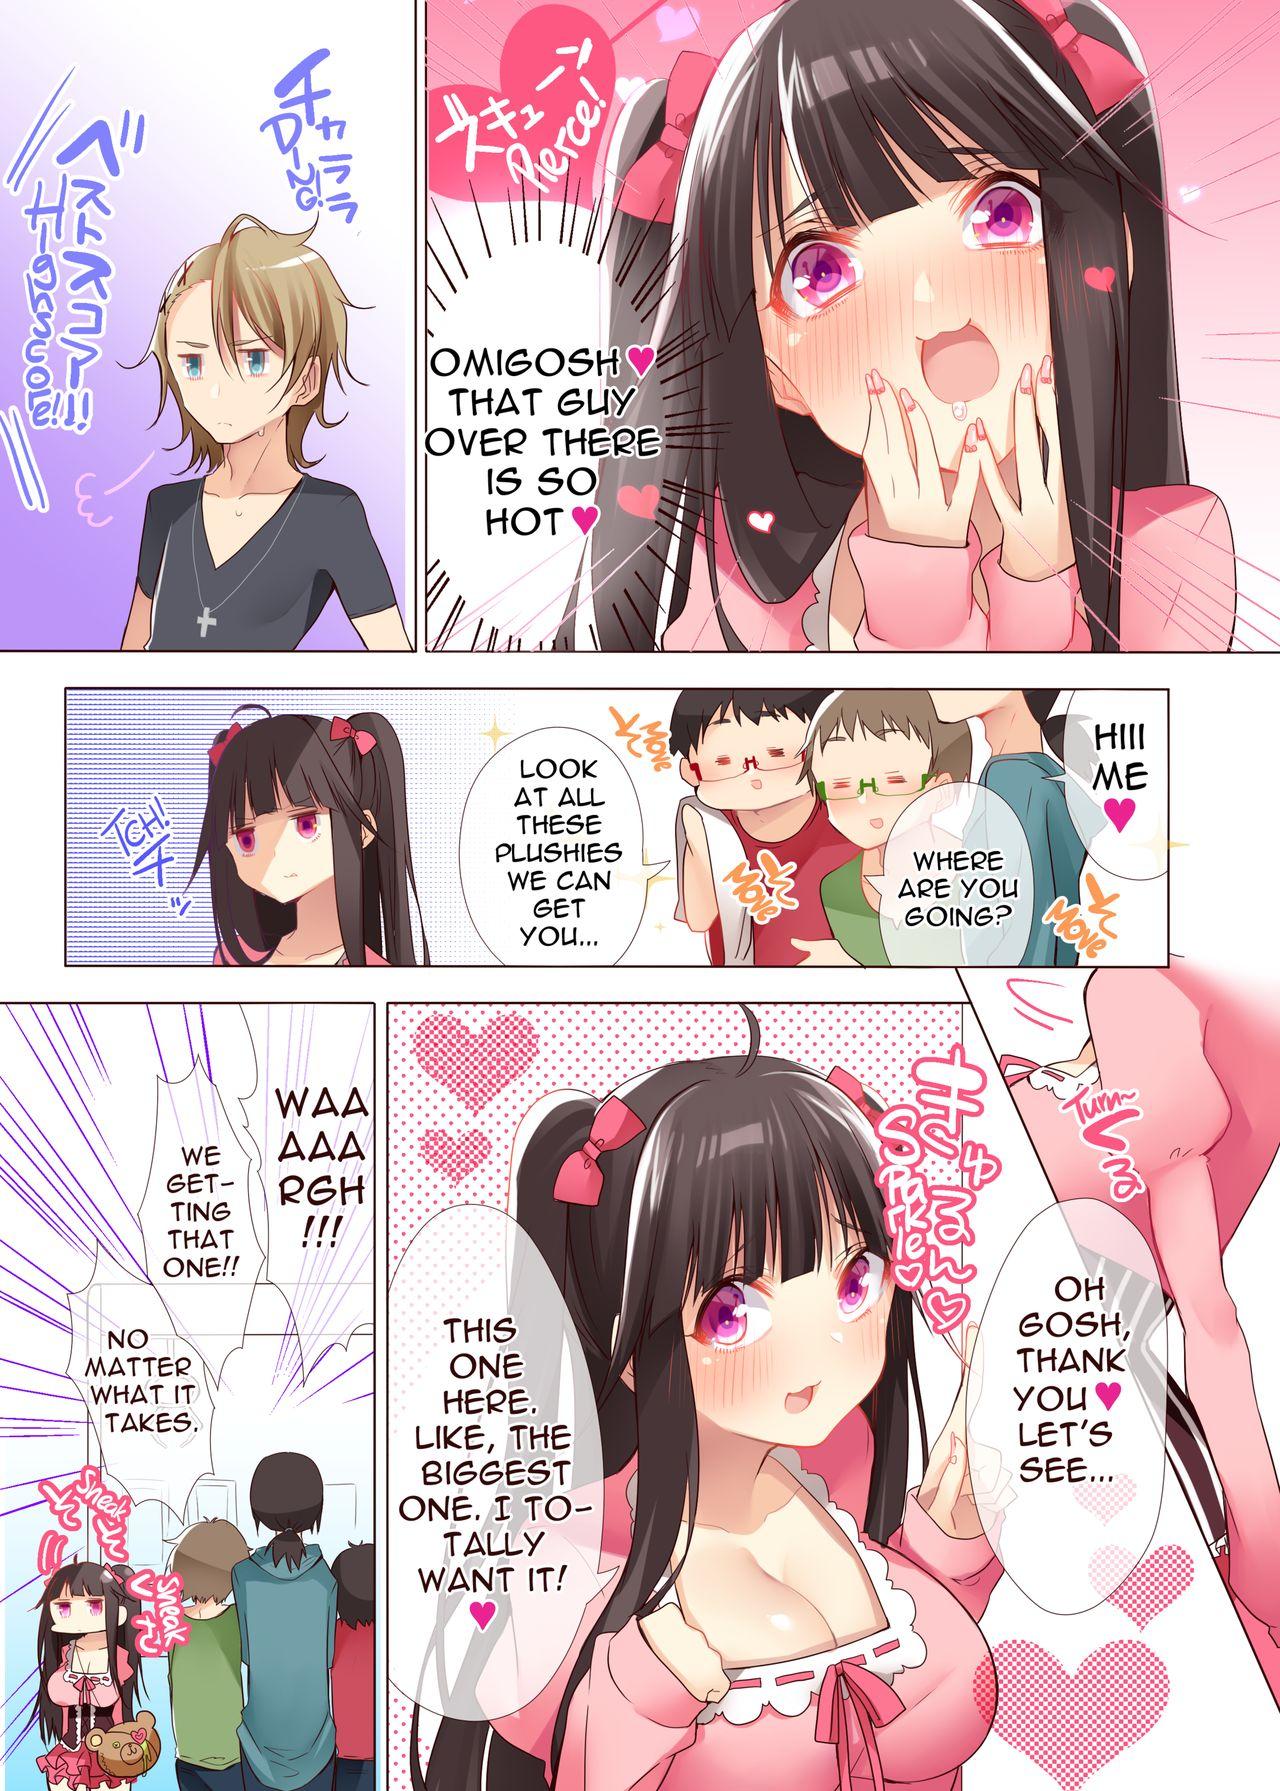 Mom The Princess of an Otaku Group Got Knocked Up by Some Piece of Trash So She Let an Otaku Guy Do Her Too!? - Original Hairy Pussy - Page 4